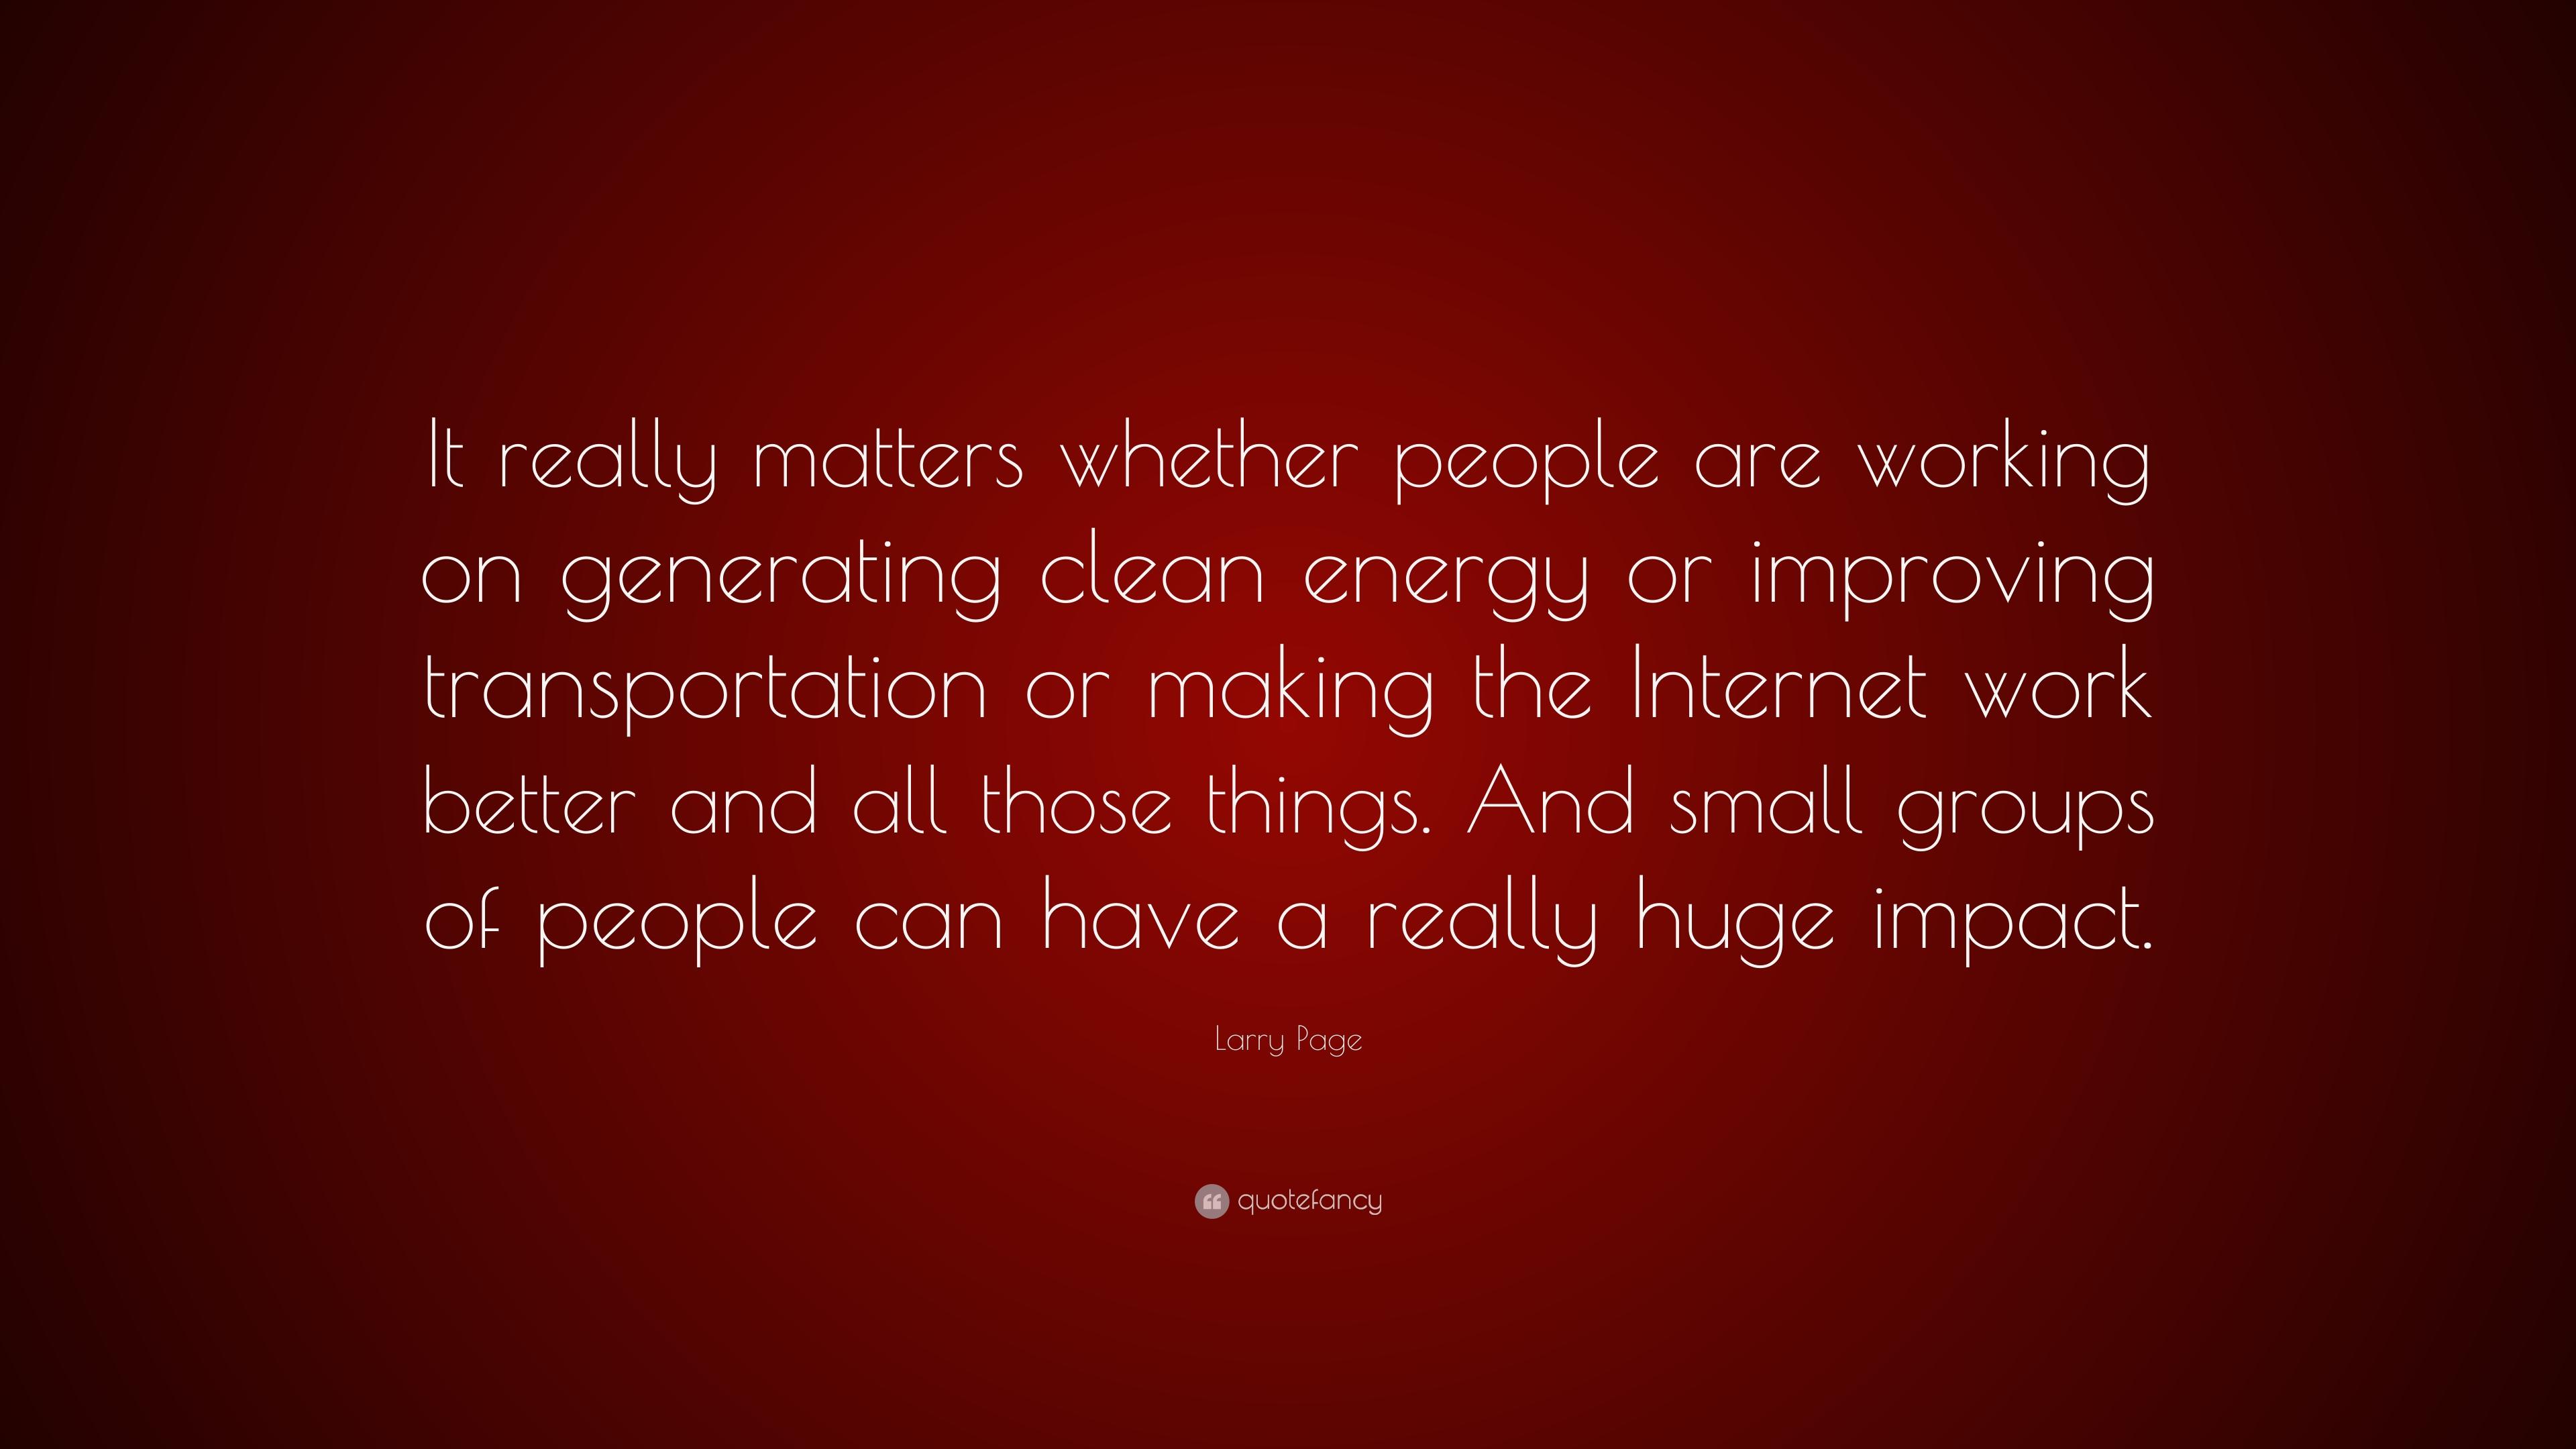 Larry Page Quote: “It really matters whether people are working